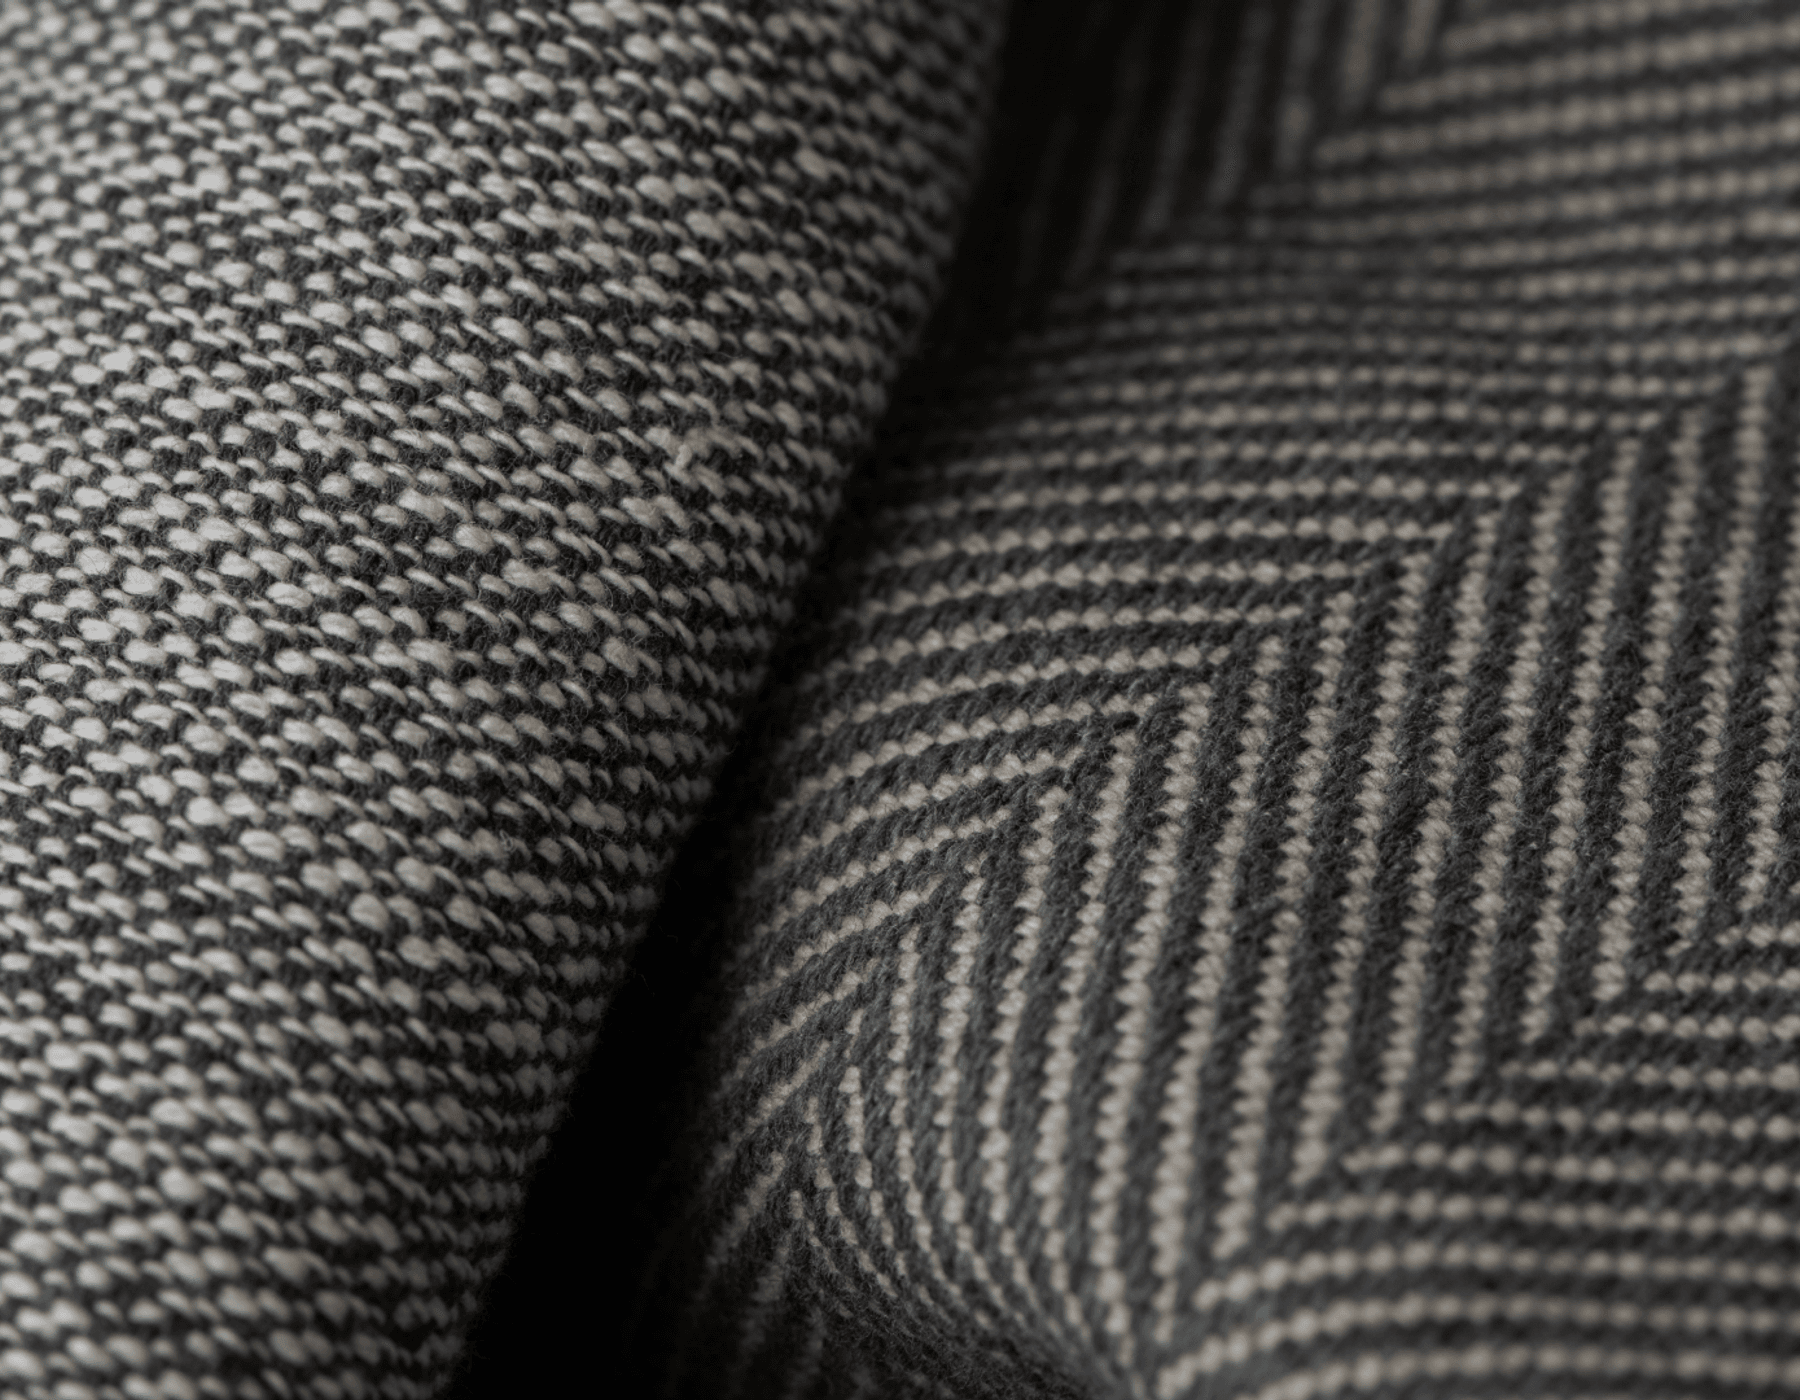 Recover™ and Valdese Weavers partner for circularity in the home textiles industry